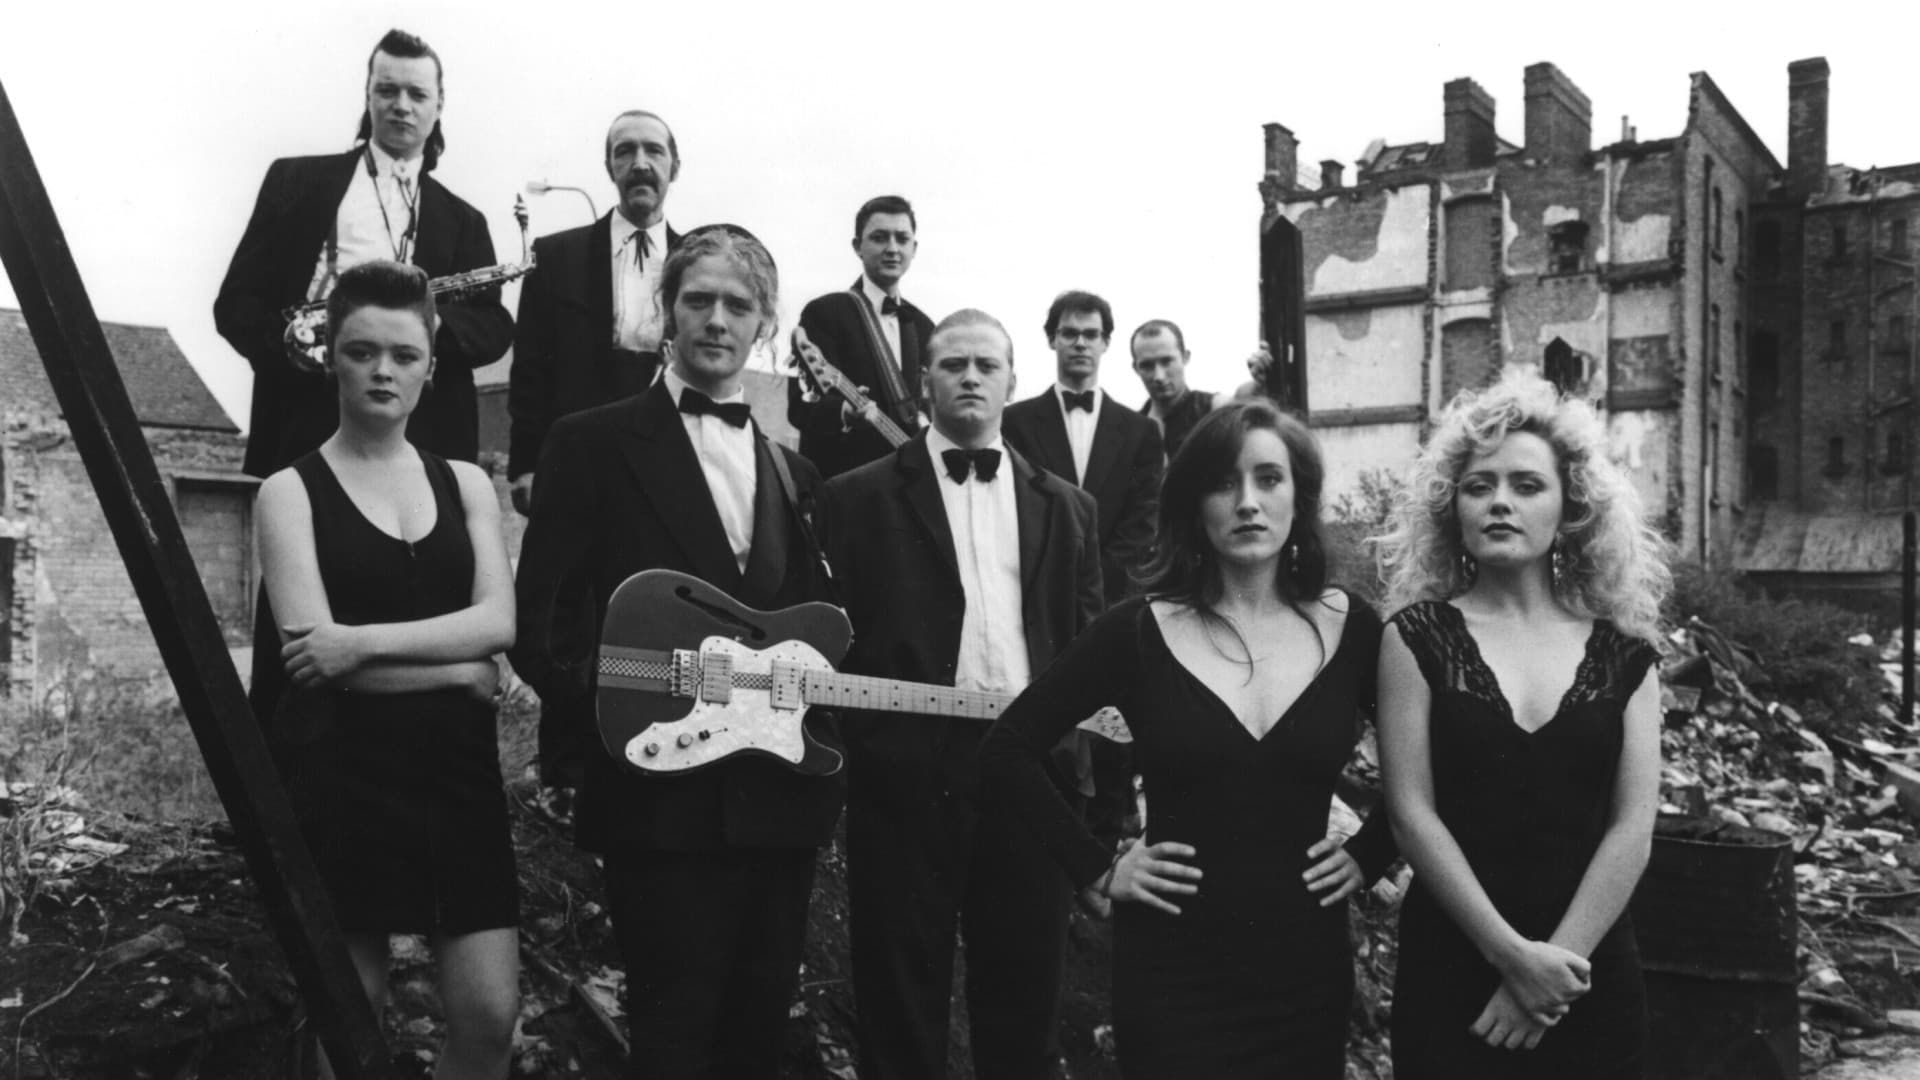 The Commitments background